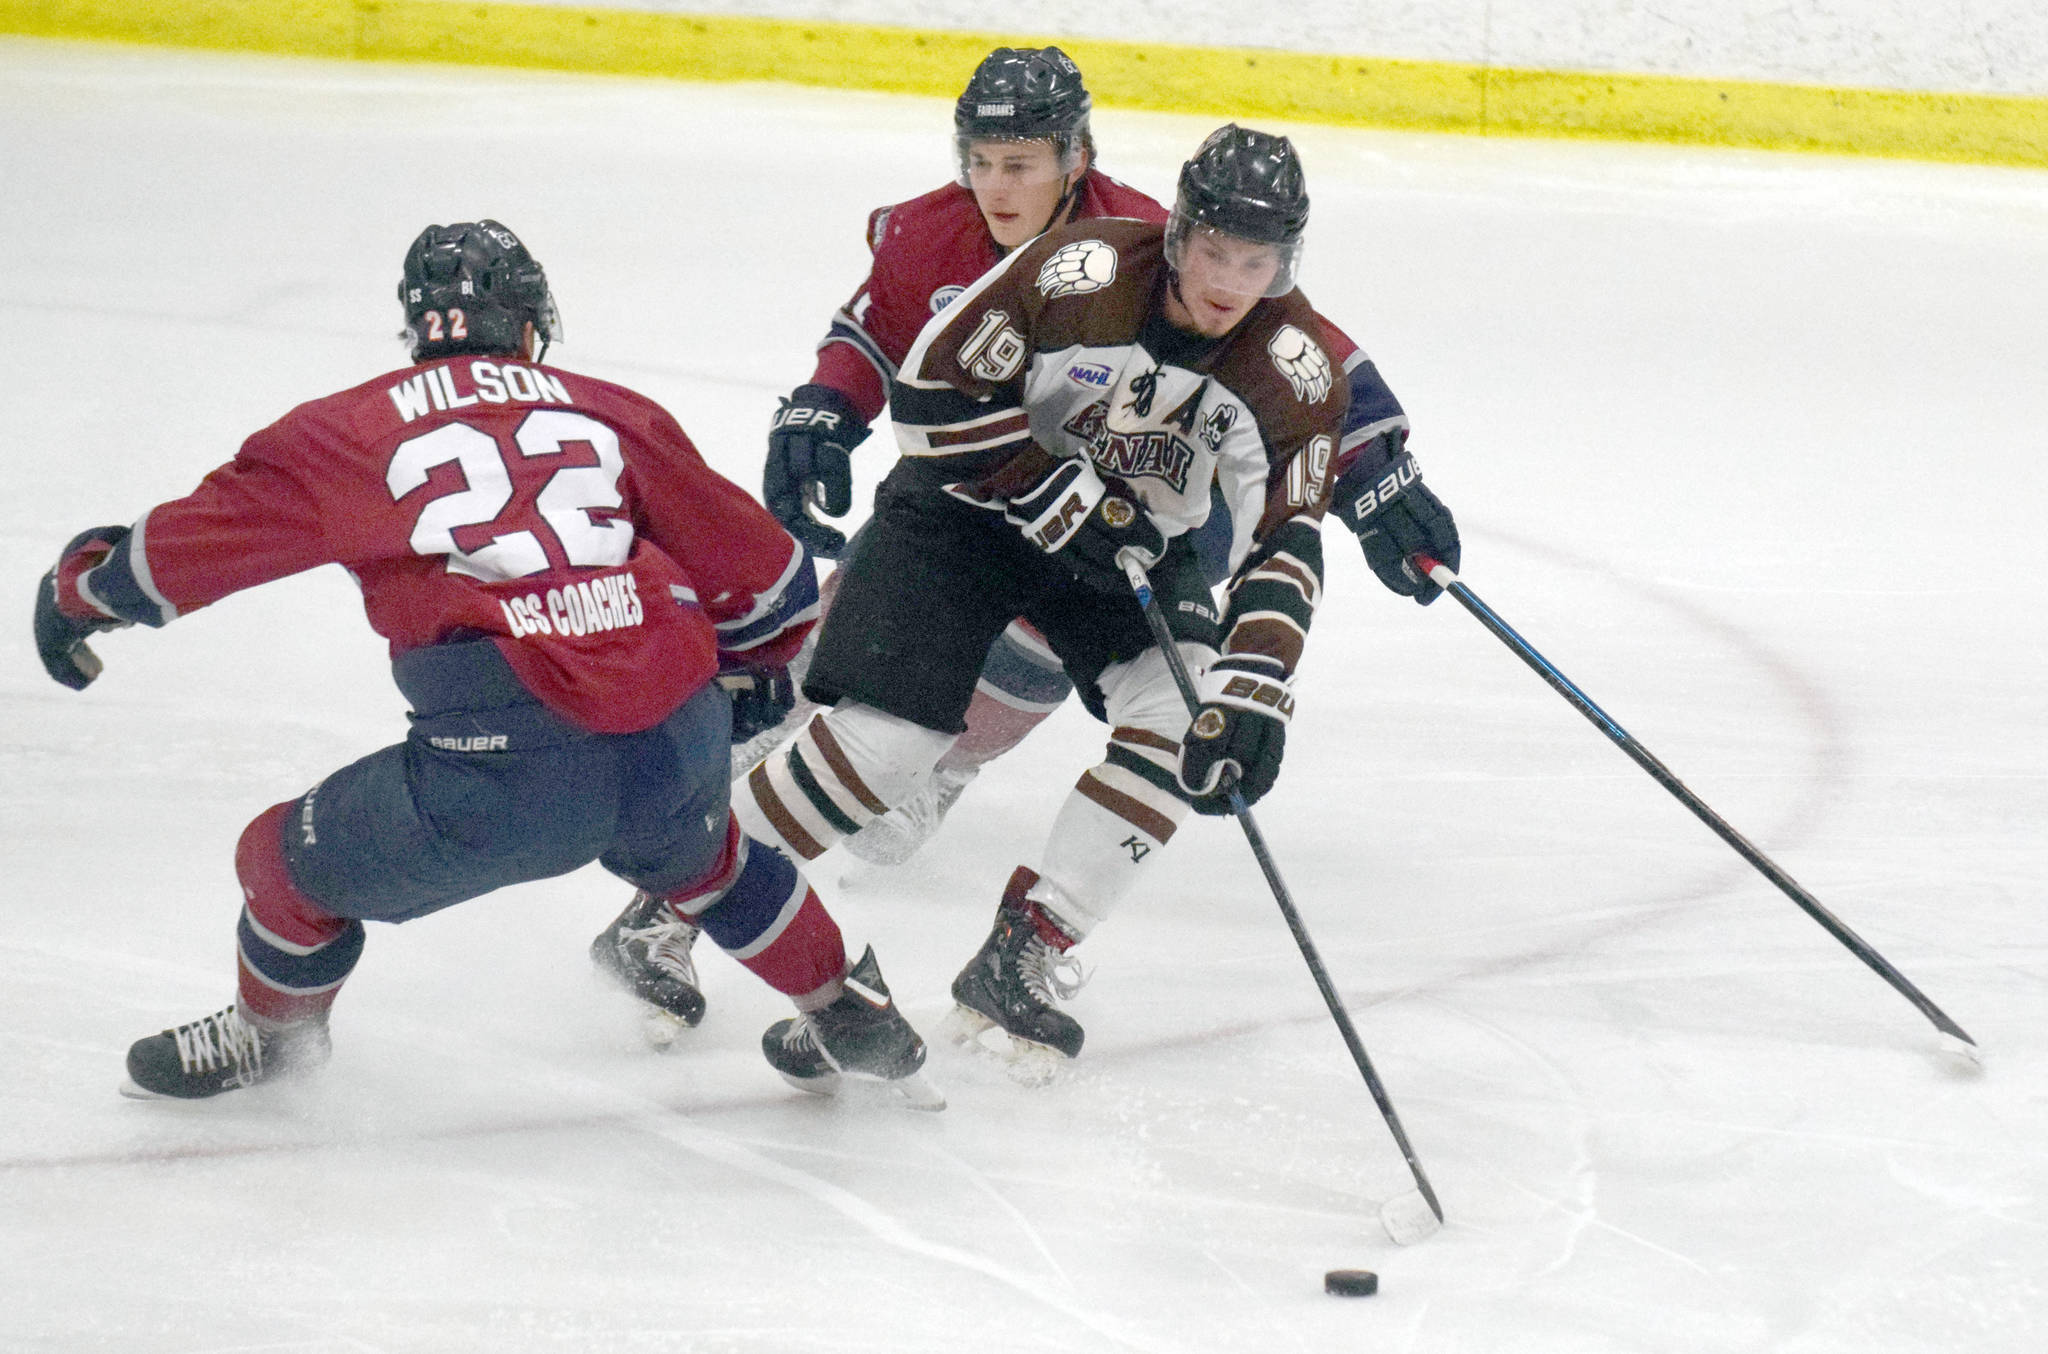 Kenai River Brown Bears forward Michael Spethmann tries to squeeze between Noah Wilson and Luke Ciolli of the Fairbanks Ice Dogs on Friday, Nov. 23, 2018, at the Soldotna Regional Sports Complex. (Photo by Jeff Helminiak/Peninsula Clarion)